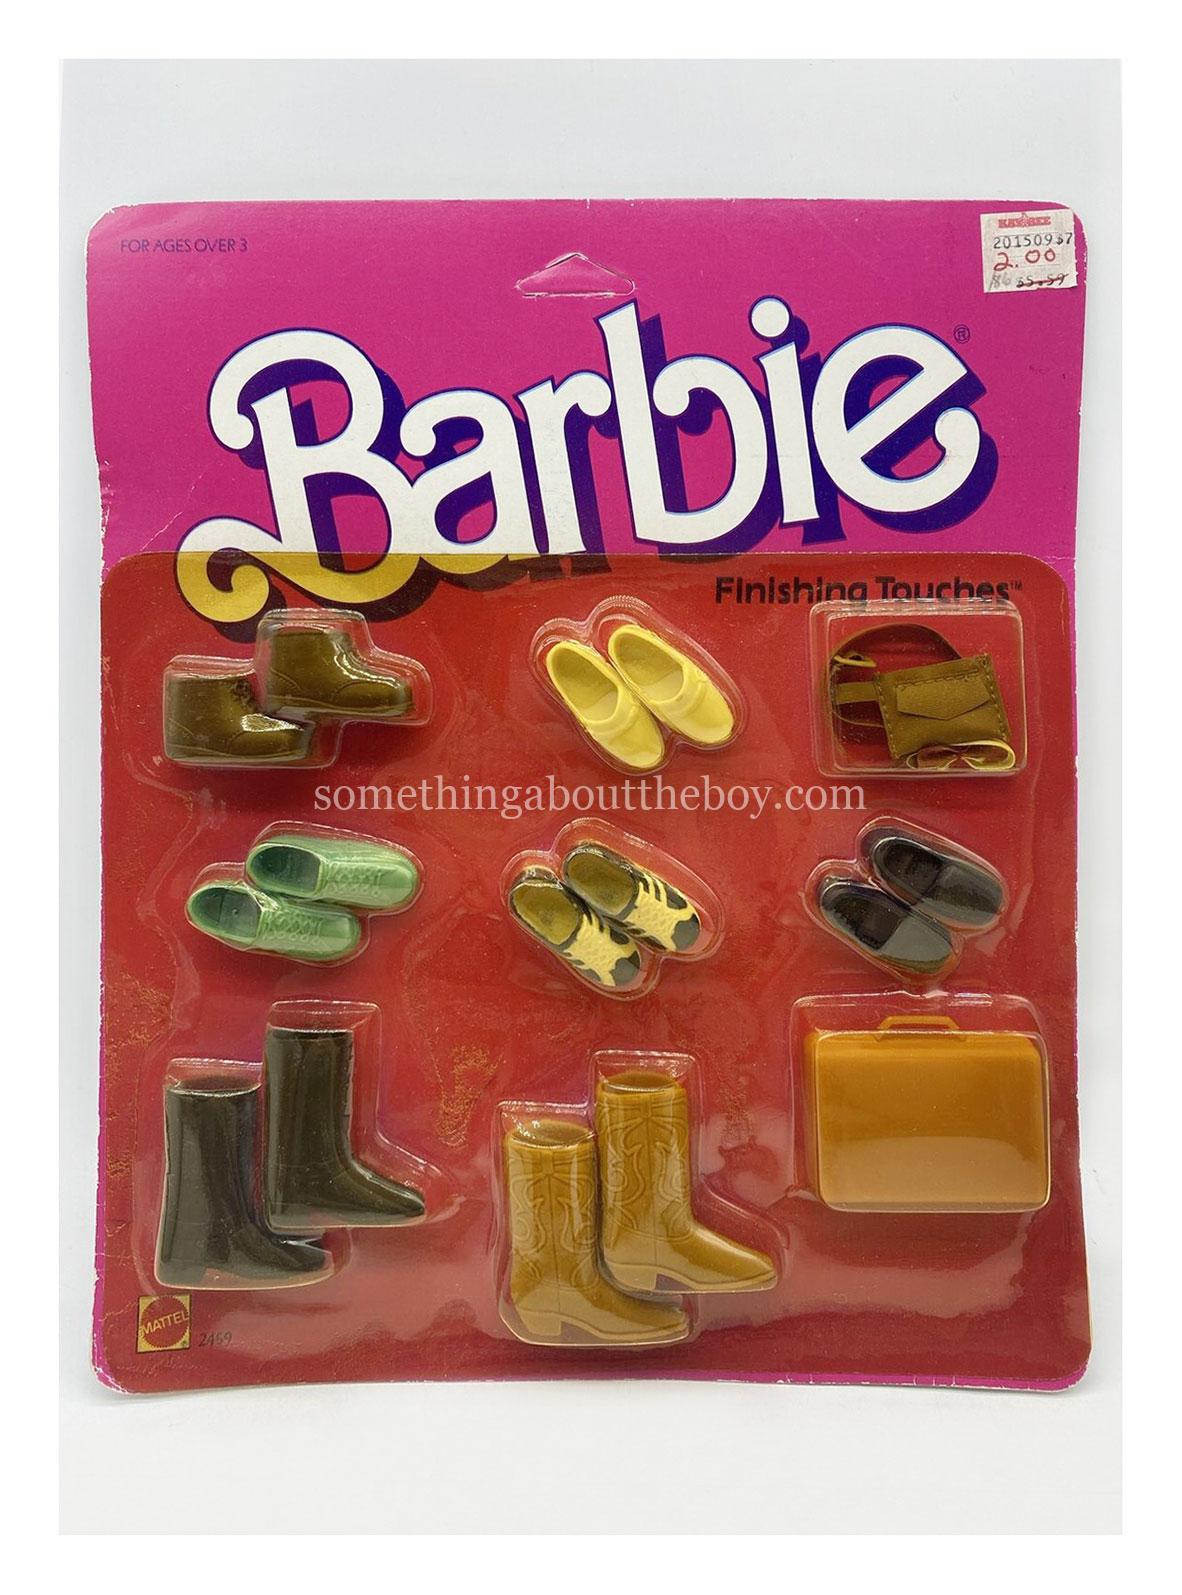 1985 Barbie Finishing Touches #2459 in original packaging